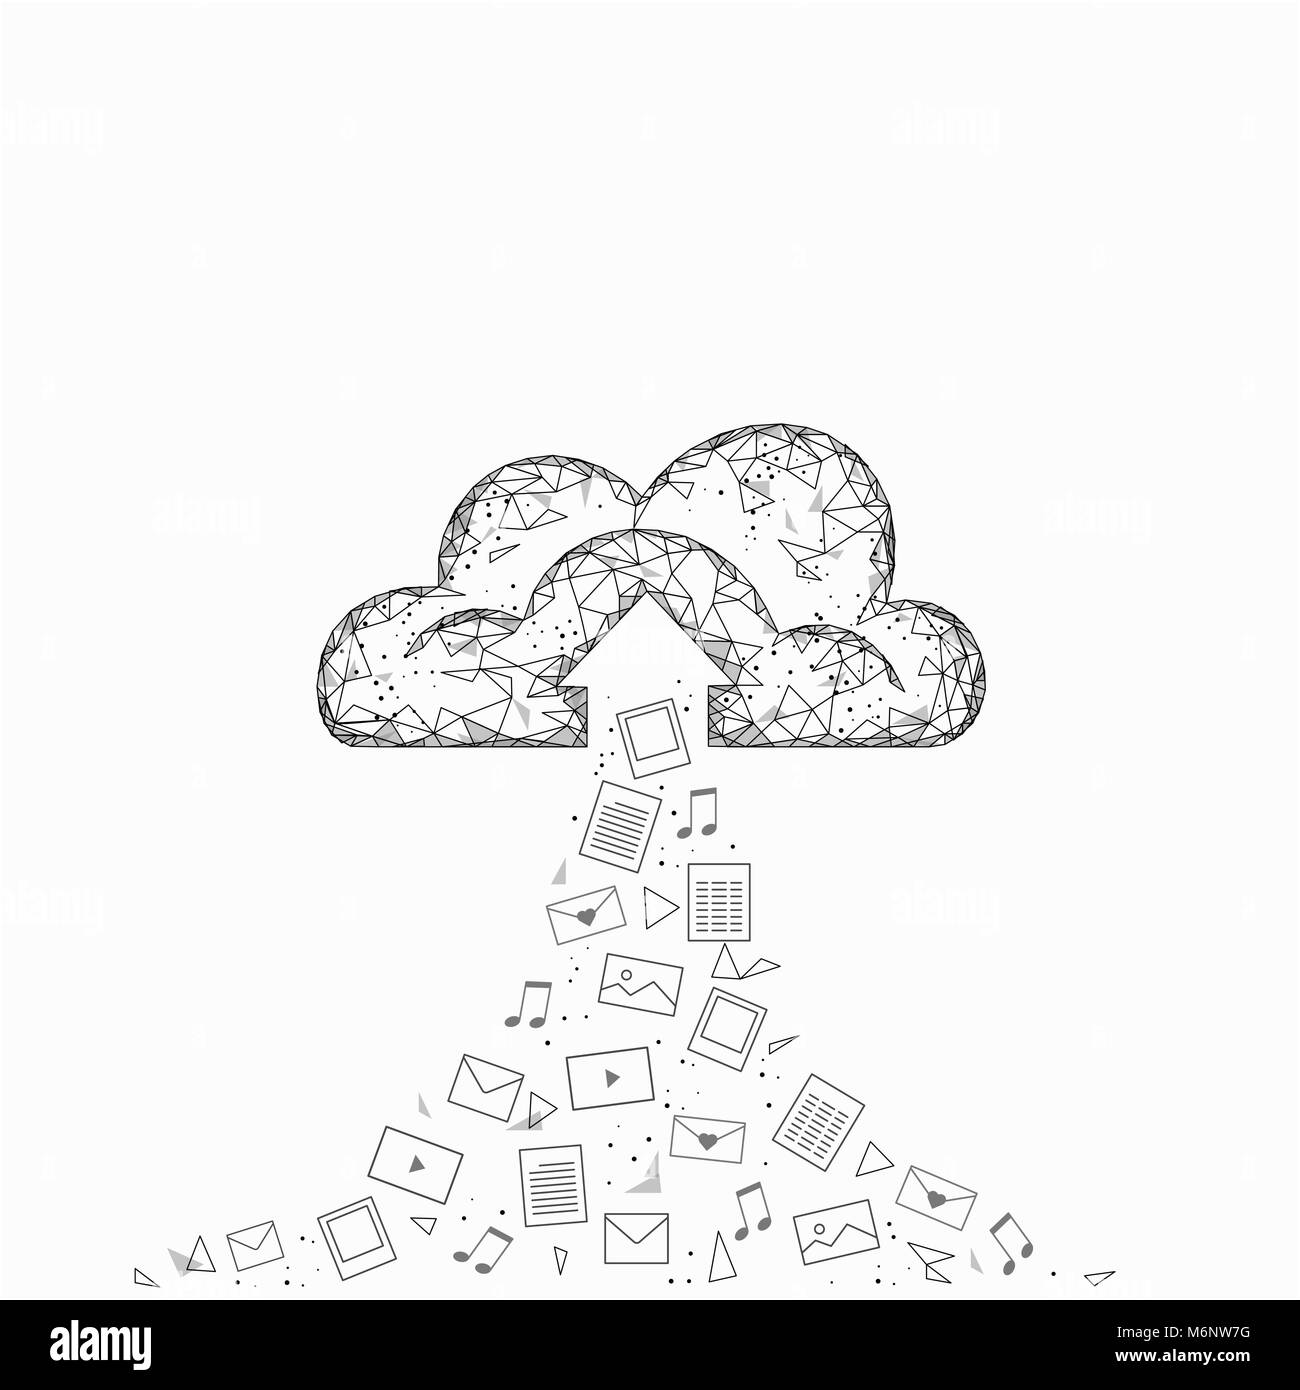 Cloud computing online storage low poly. Polygonal future modern internet business technology. White gray global data information exchange folder file icon Stock Vector